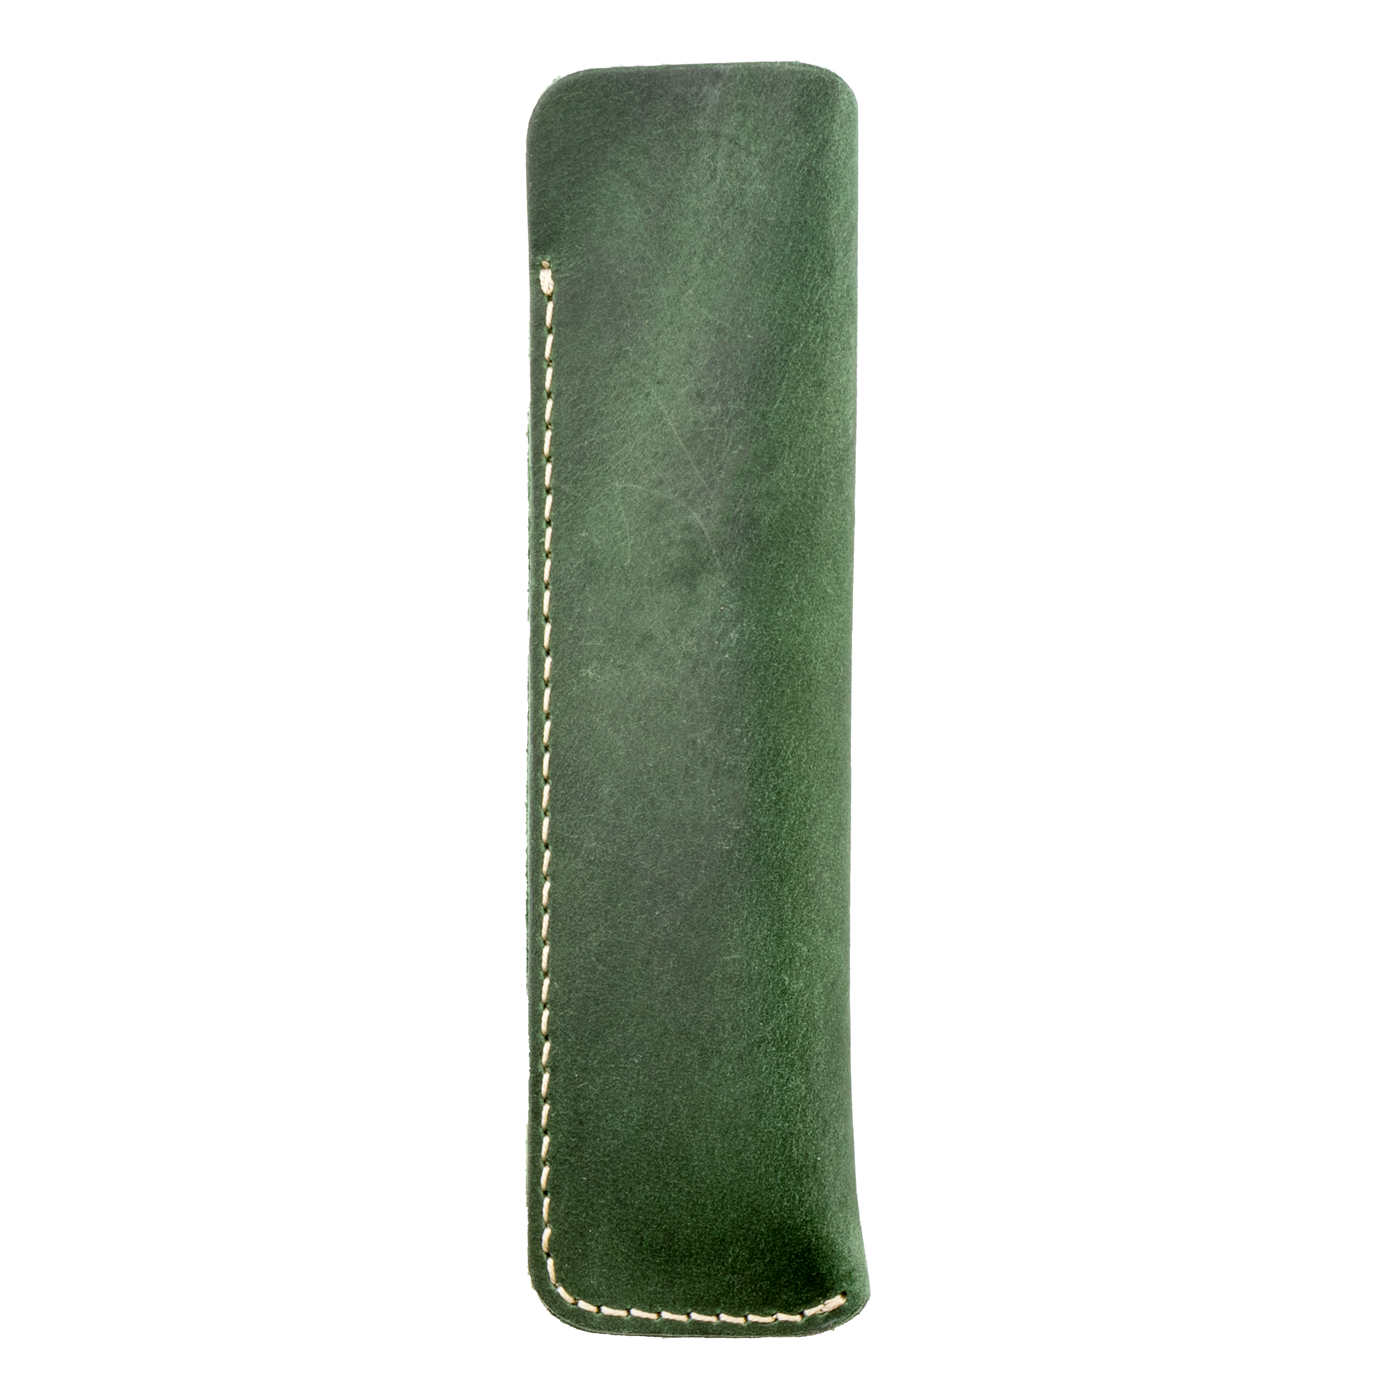 Galen Leather Co. Leather Single Pen Sleeve- Crazy Horse Forest Green